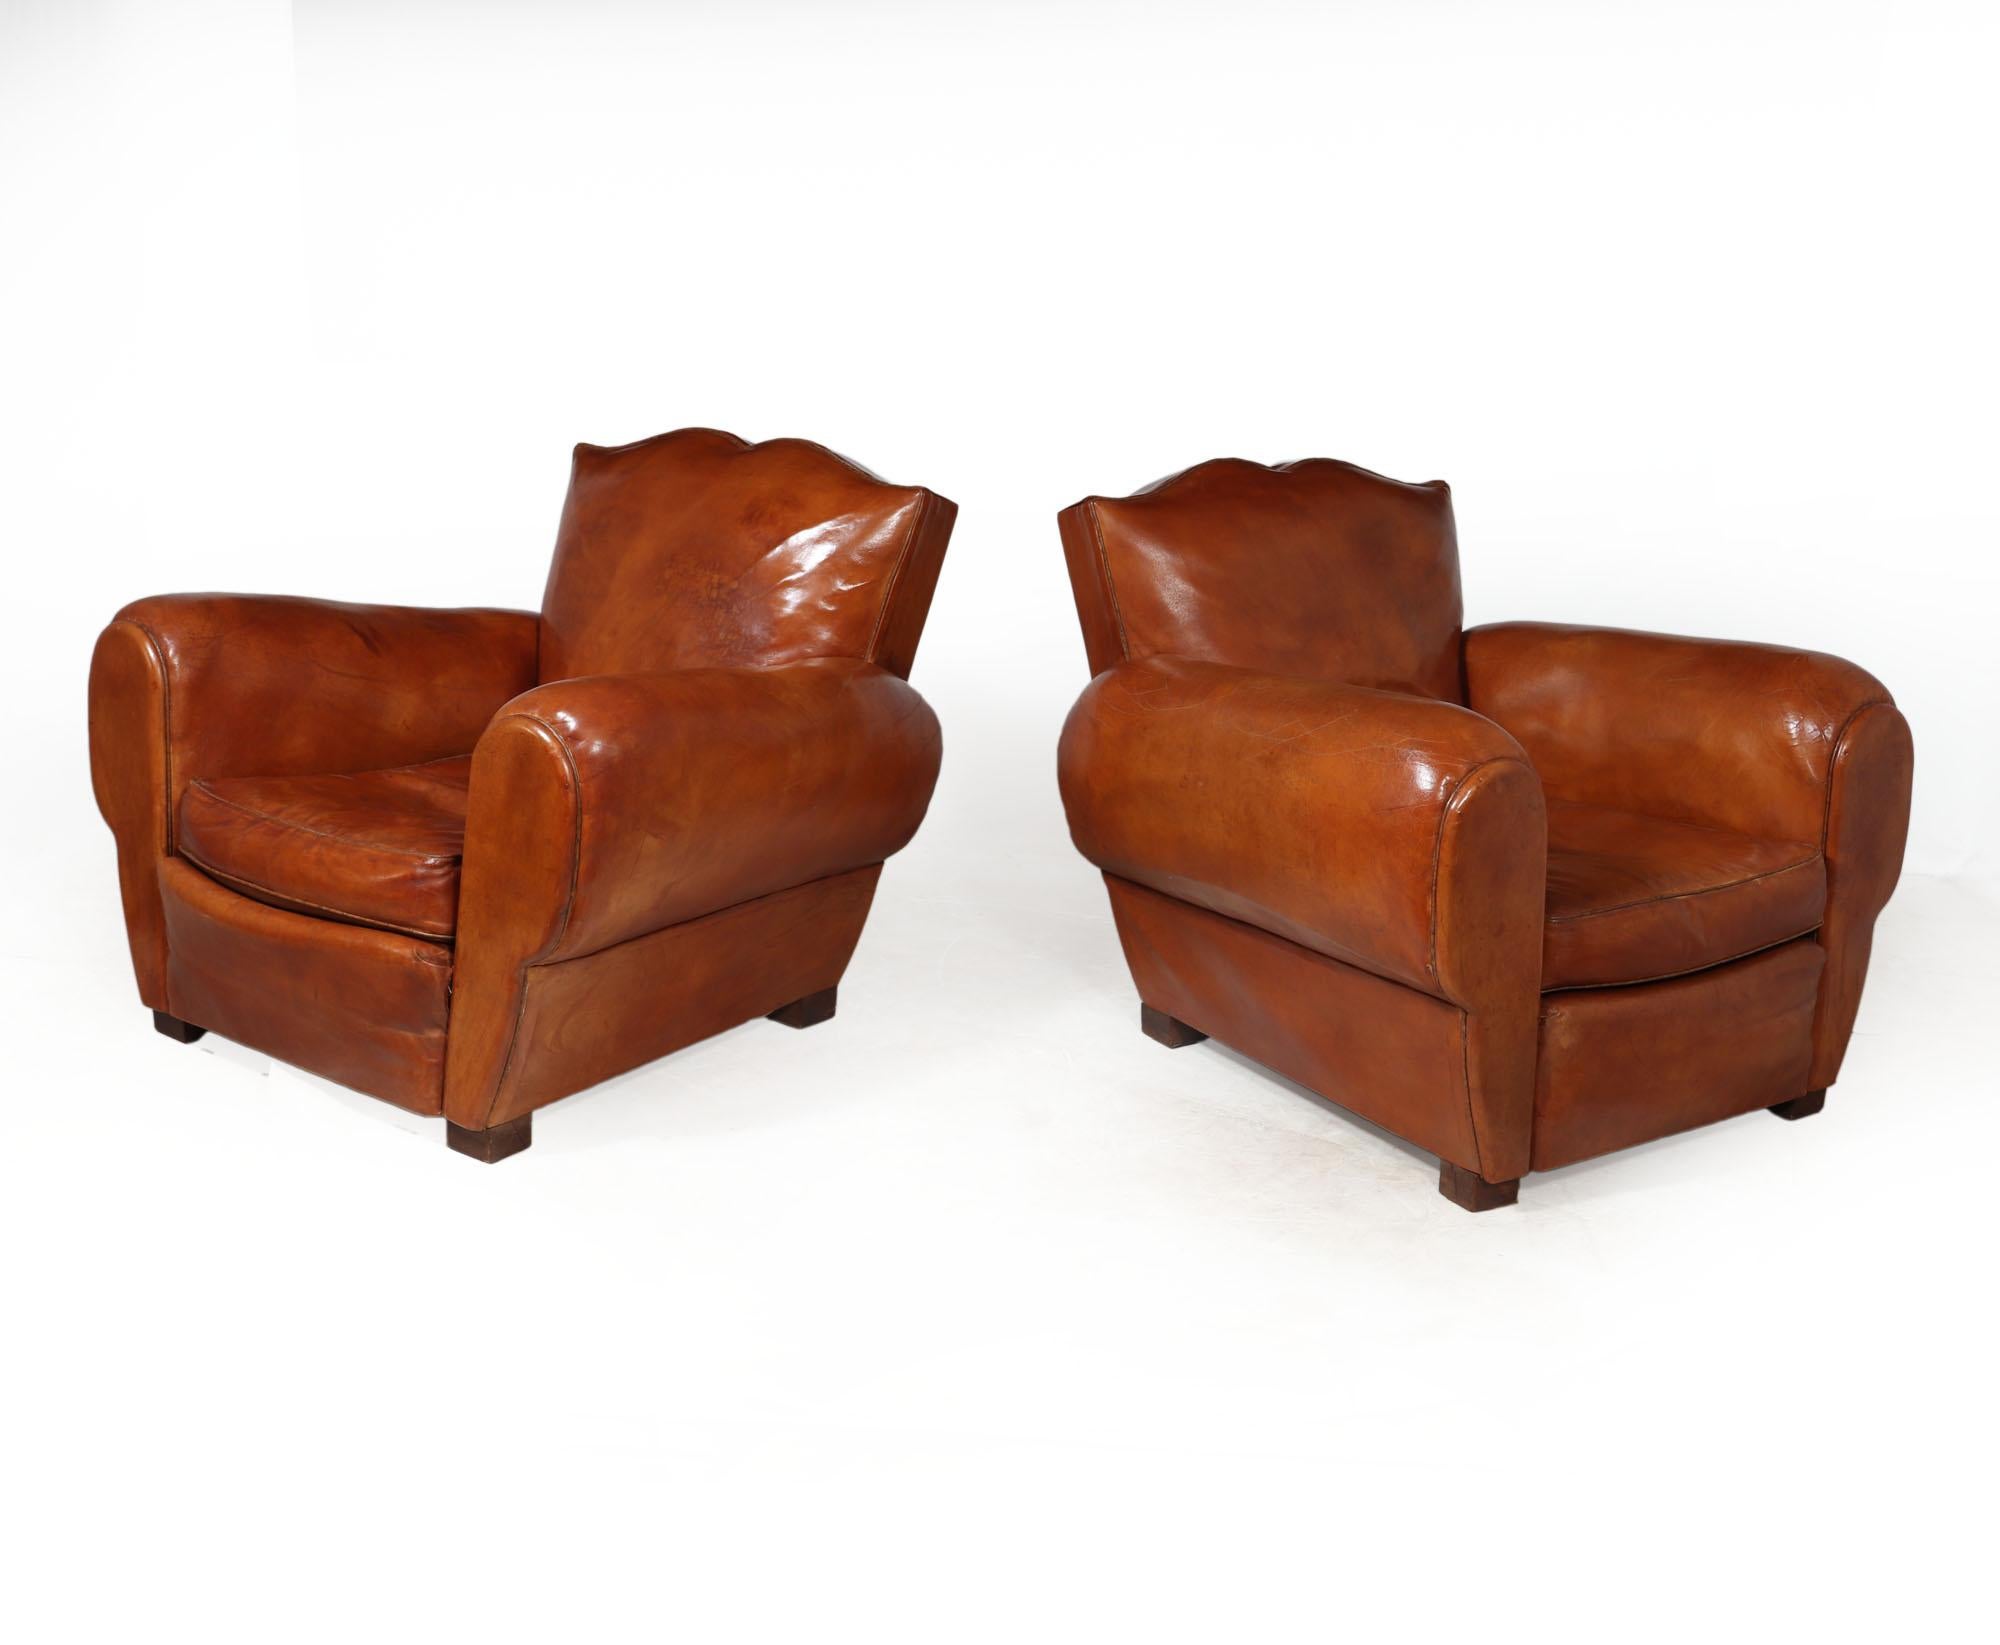 FRENCH MOUSTACHE BACK CLUB ARMCHAIRS
These French leather moustache back club chairs are an excellent choice for any home, fitting in with any eclectic interior. Original upholstery with high-grade leather that has undergone treatment in our